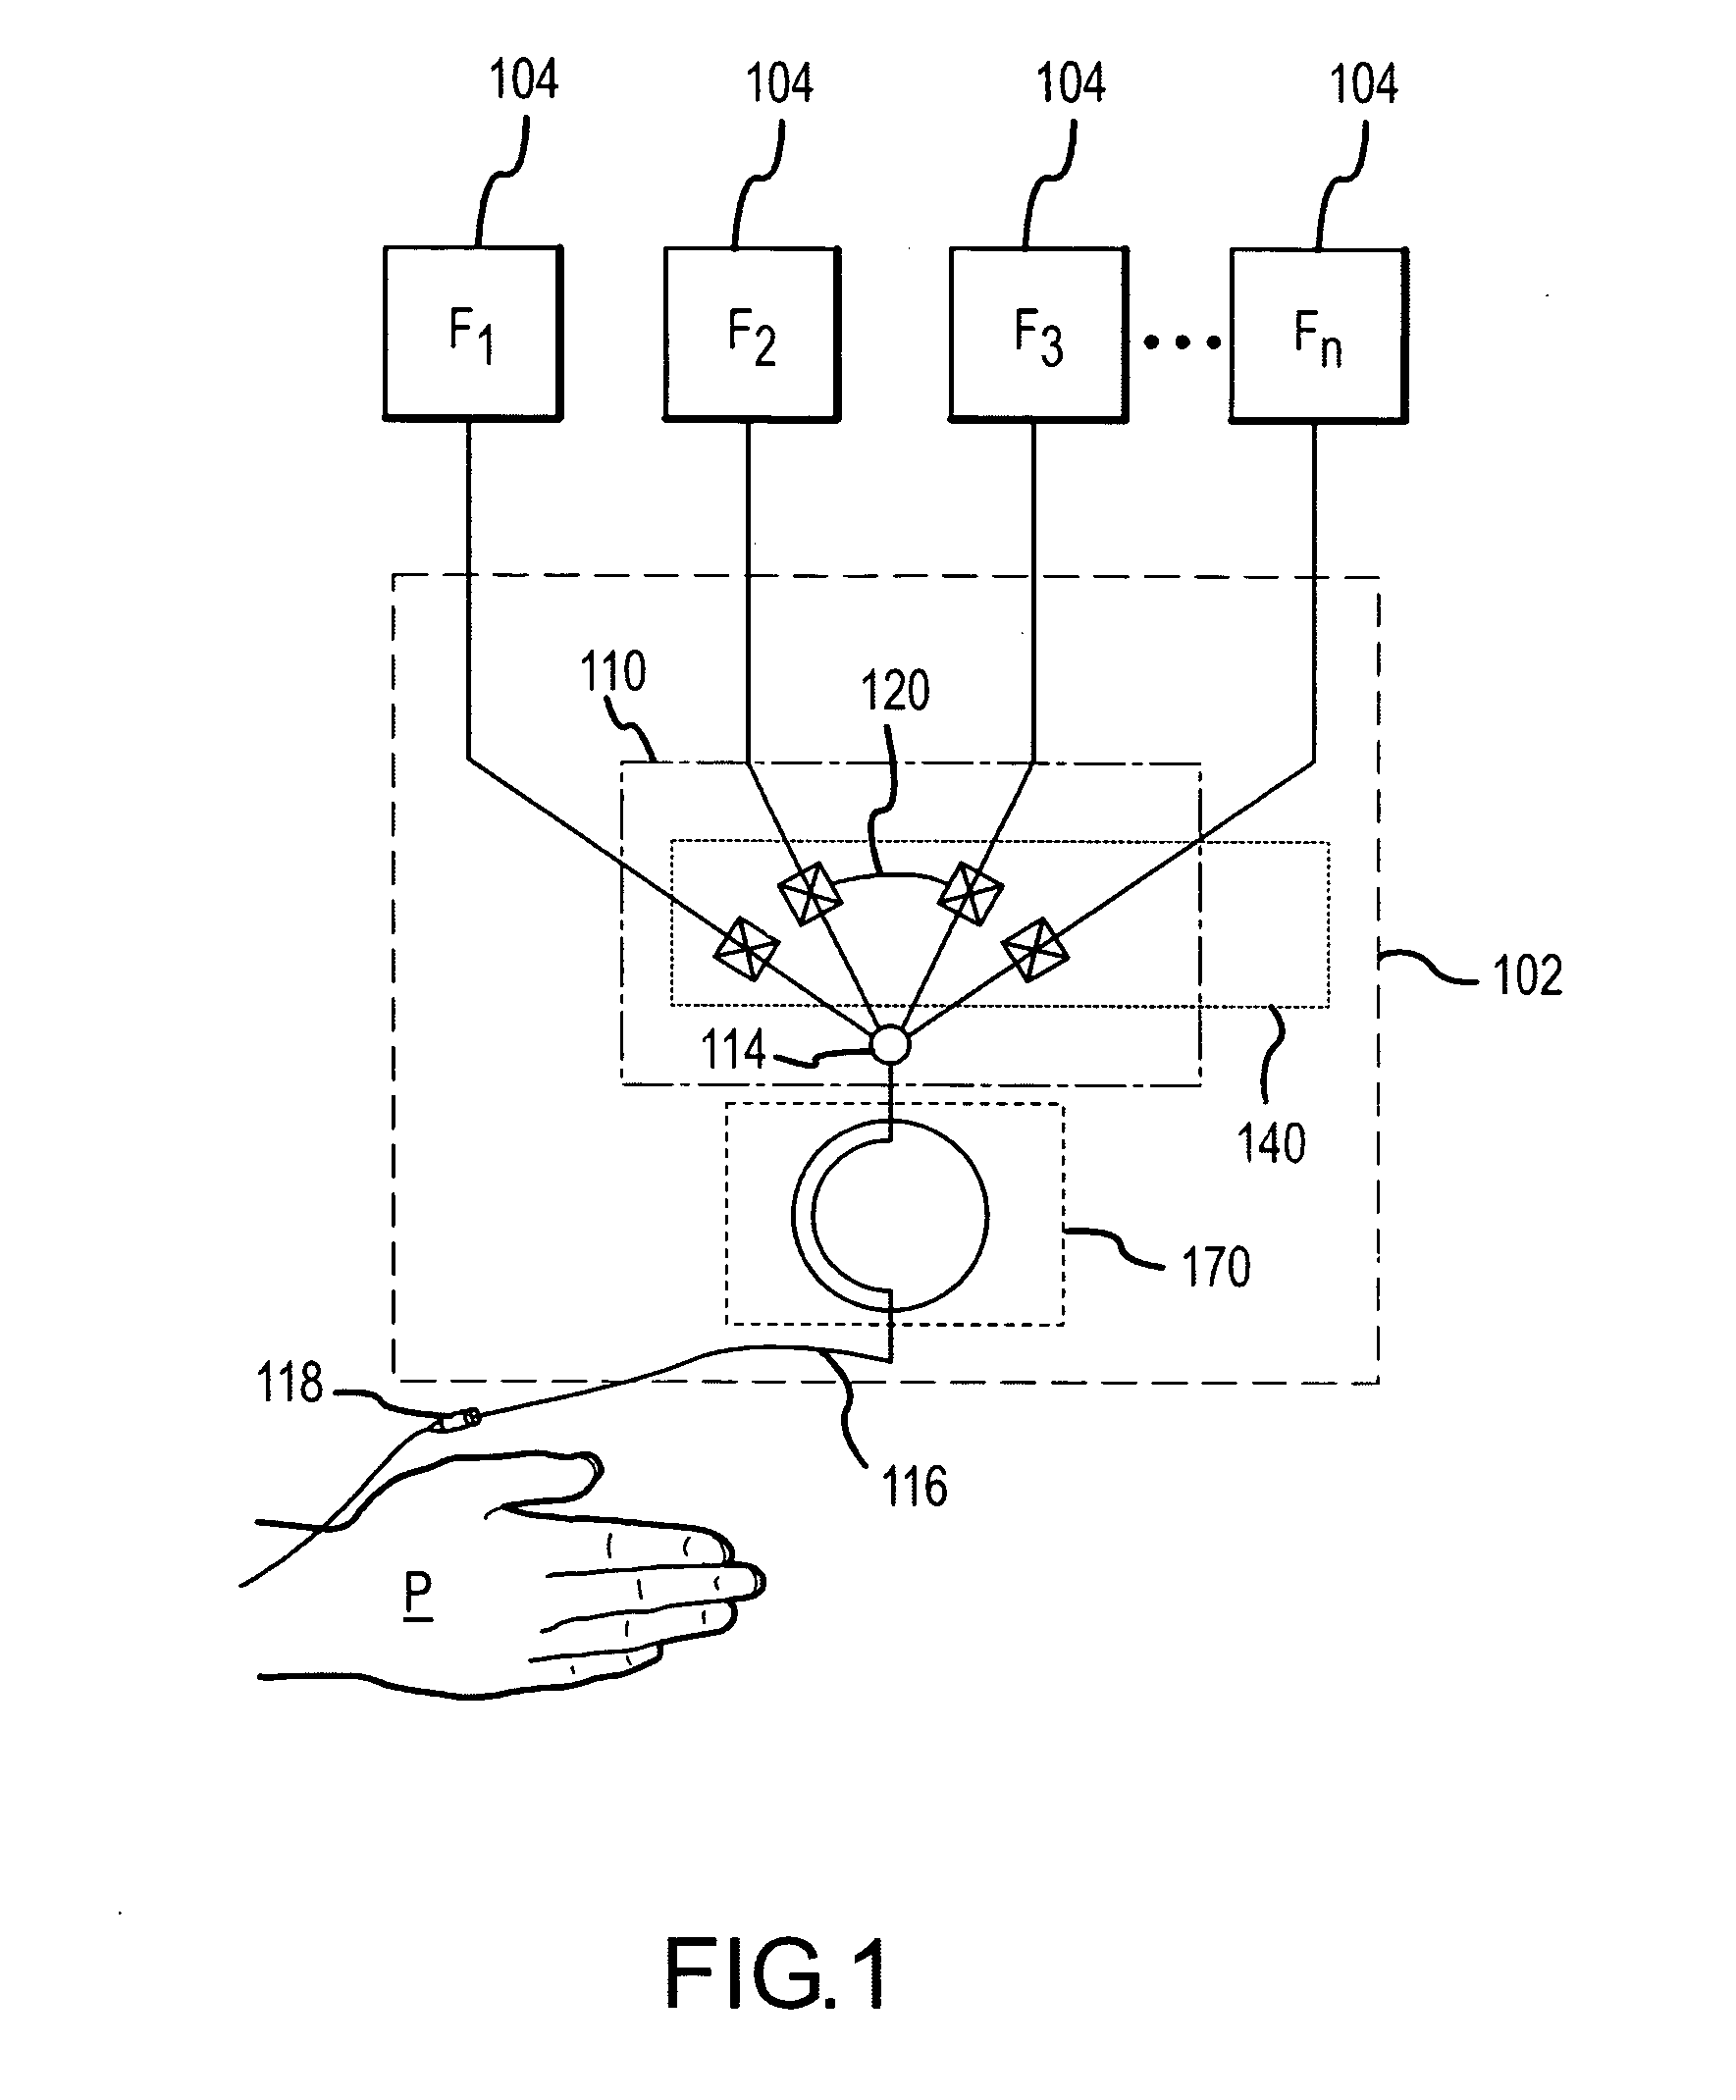 Medical fluid delivery system and method relating to the same